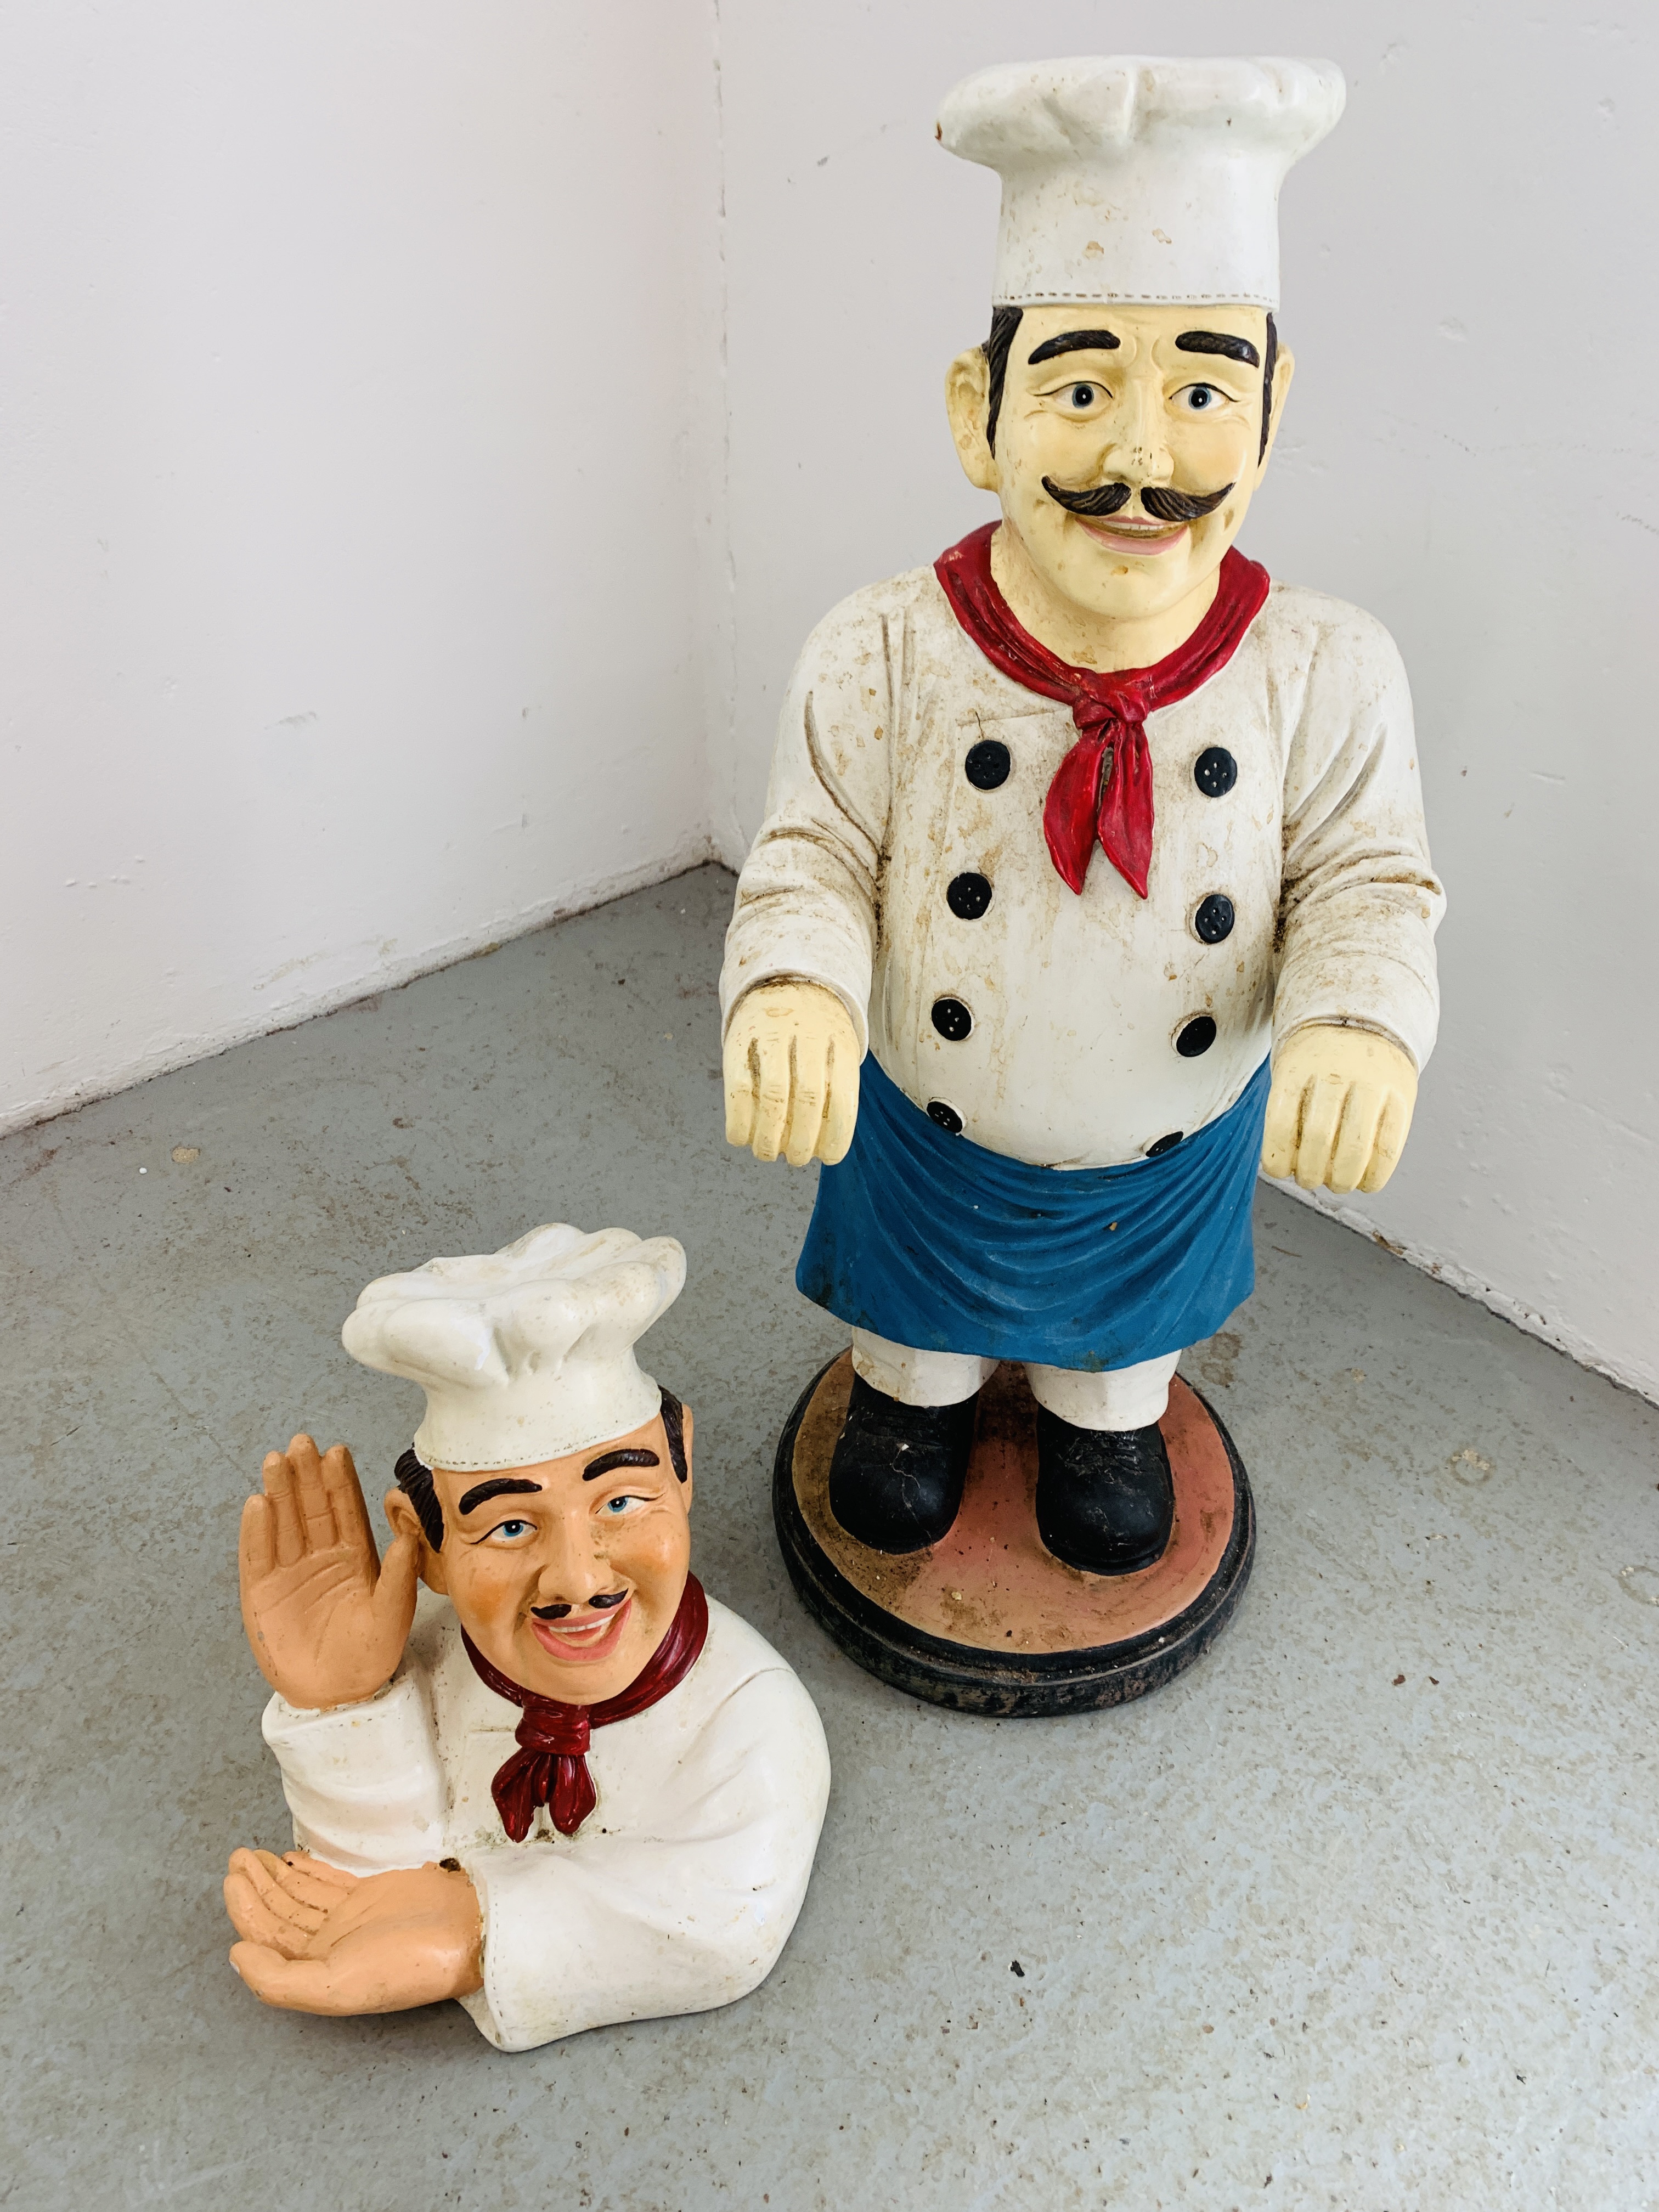 A NOVELTY STANDING "CHEF" FIGURE A/F AND ONE OTHER "CHEF" FIGURE